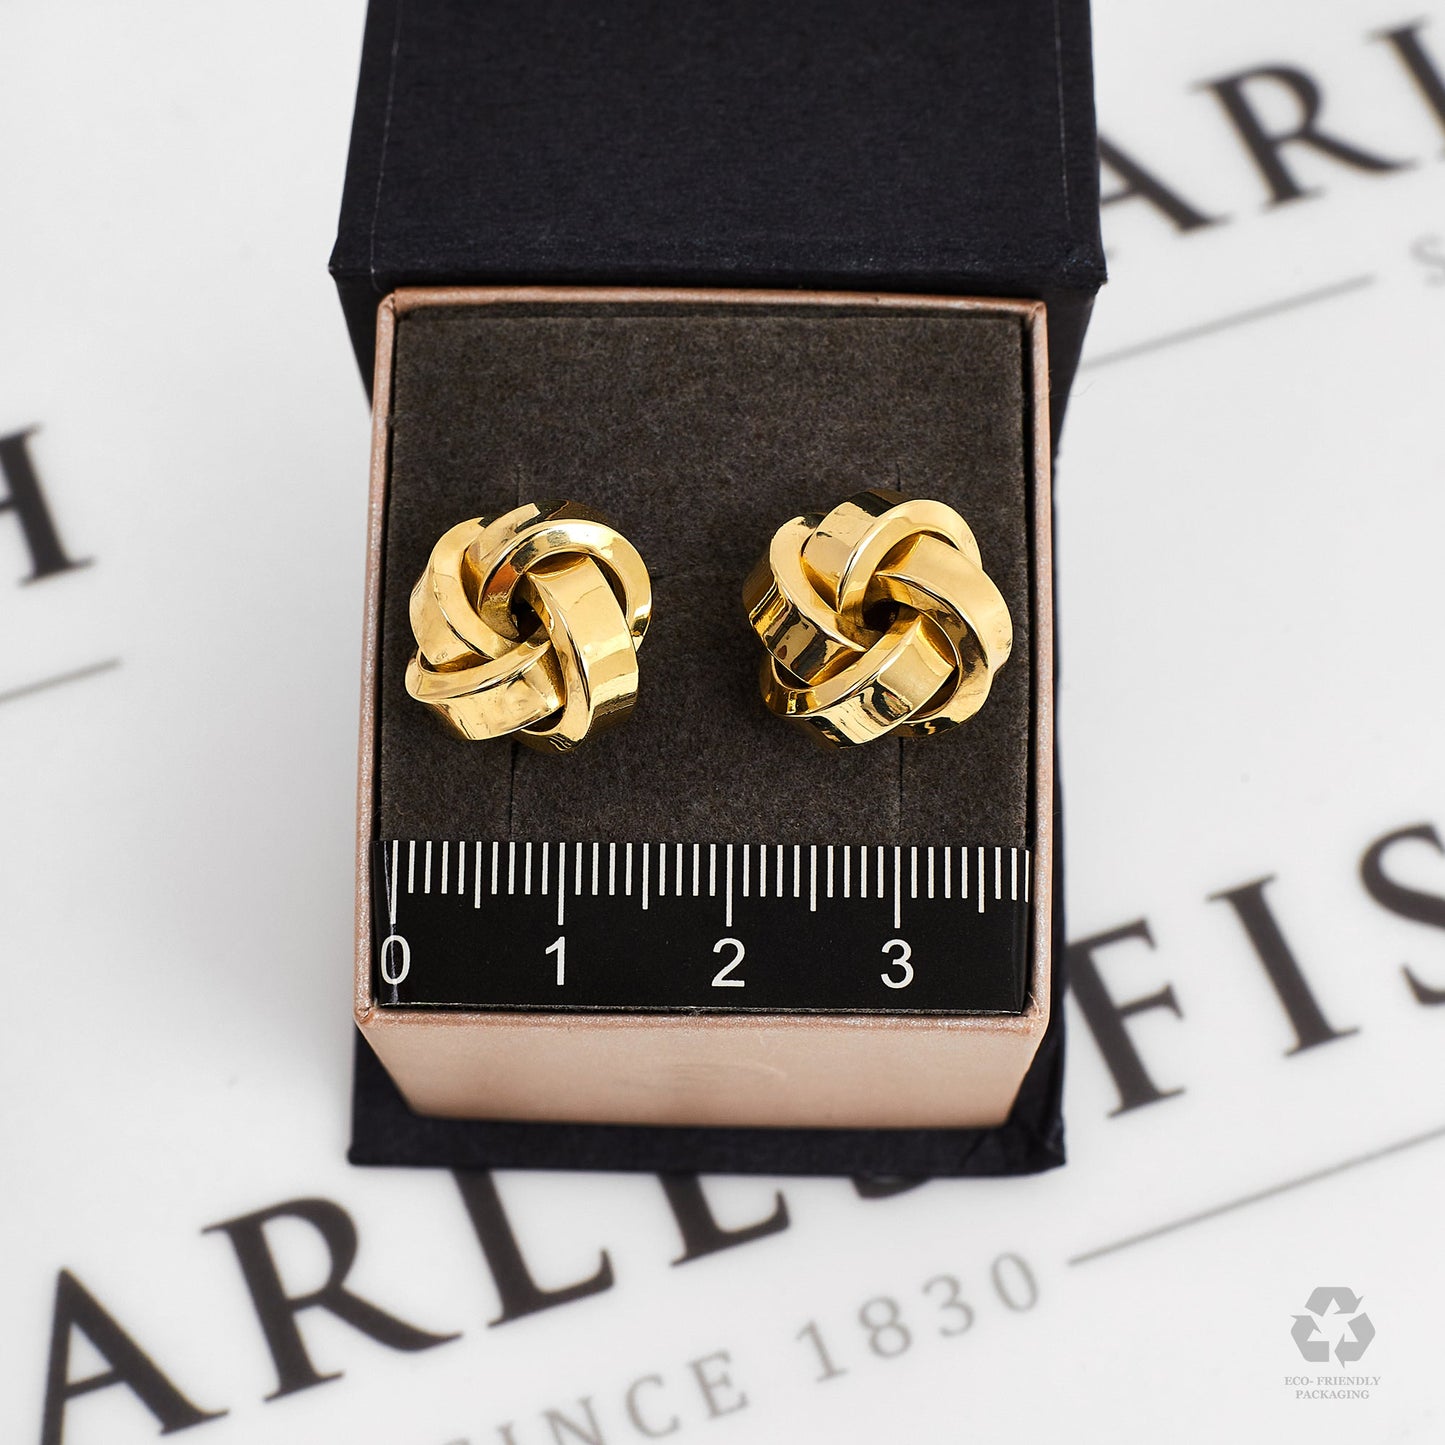 Pre-Owned 14ct Yellow Gold Knot Design Cufflinks